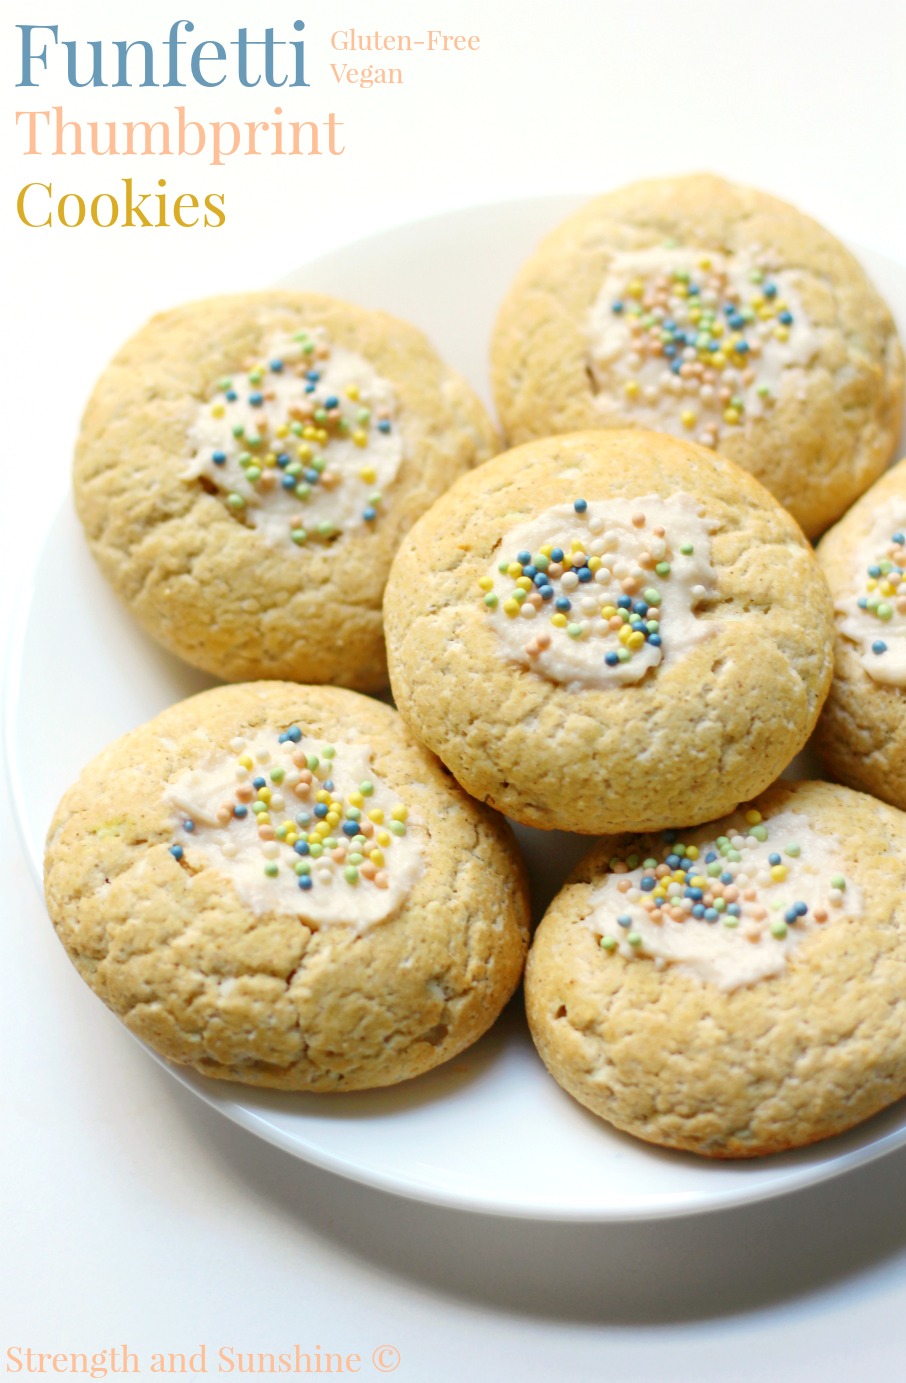 Funfetti Thumbprint Cookies | Strength and Sunshine @RebeccaGF666 All of the cake qualities of Funfetti in cookie form! Gluten-free and vegan Funfetti Thumbprint Cookies, soft, sweet, & tender with a "cream cheese" center to mimic frosting! The iconic celebratory dessert for any occasion!